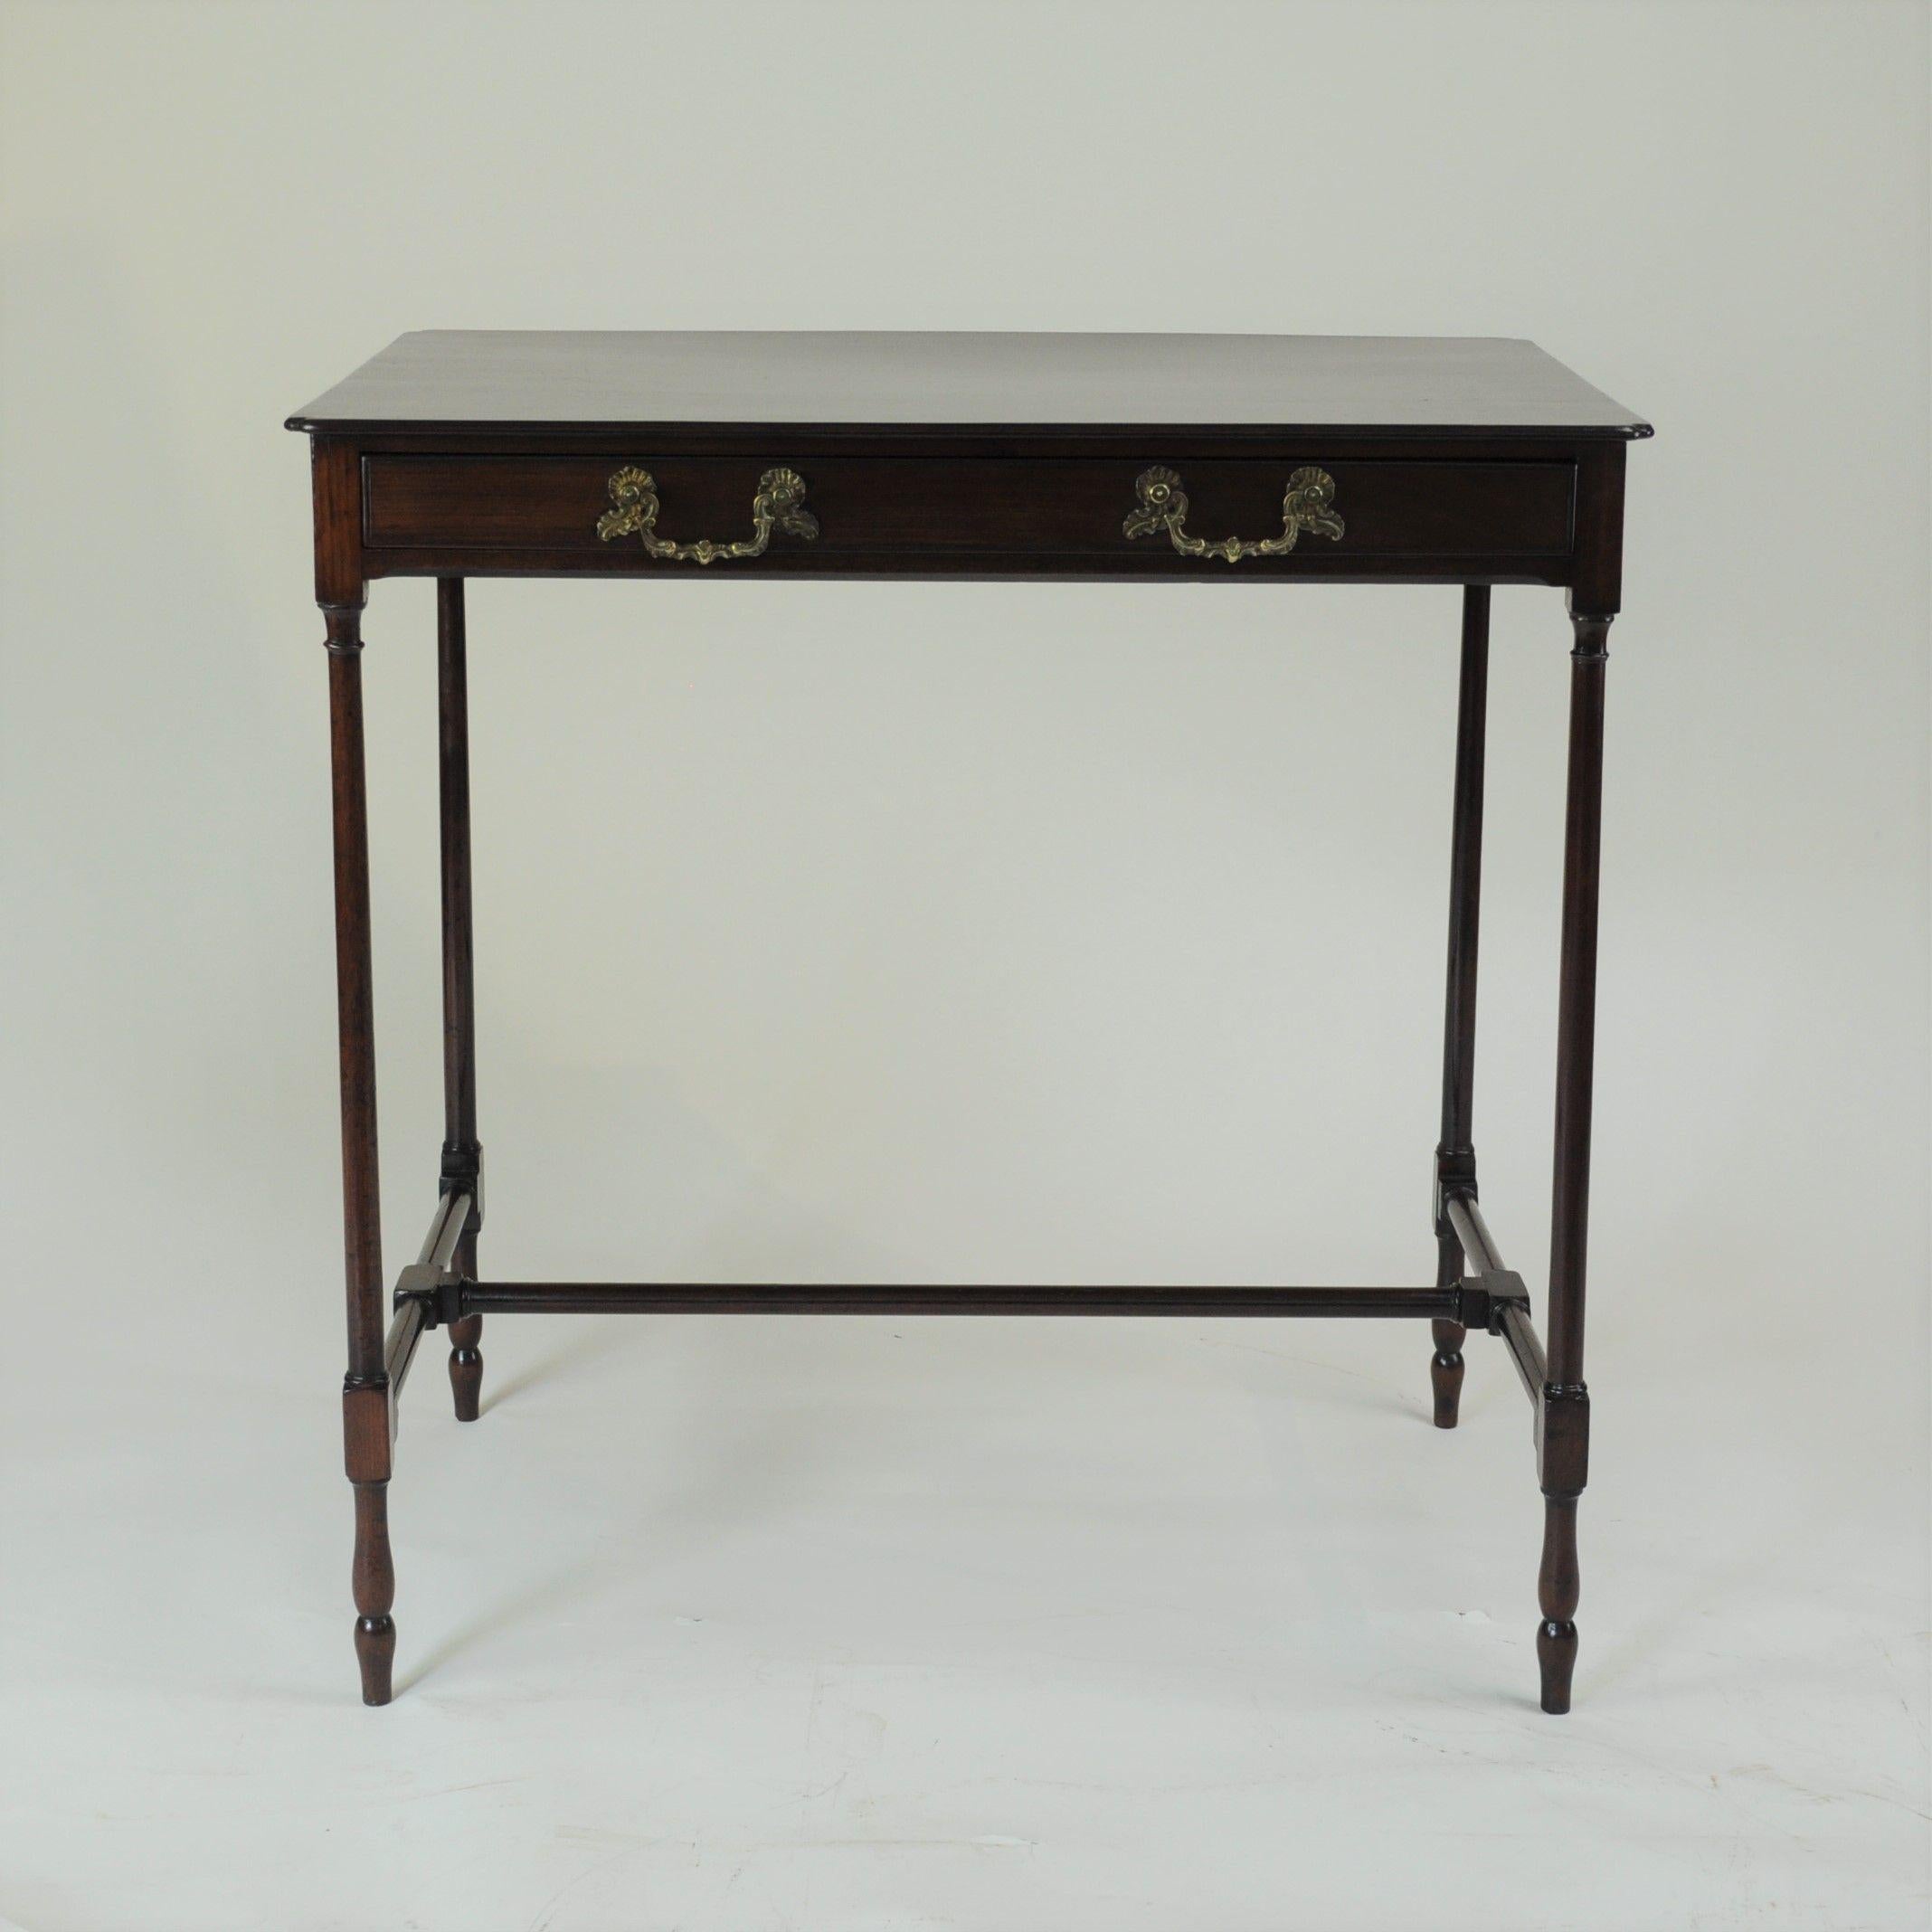 A fine quality 18th century mahogany 'spider legged' side table. The thin, one-piece top with re-entrant corners all round, above an apron fitted with an oak-lined narrow drawer and standing on extremely elegant slender turned legs, united towards